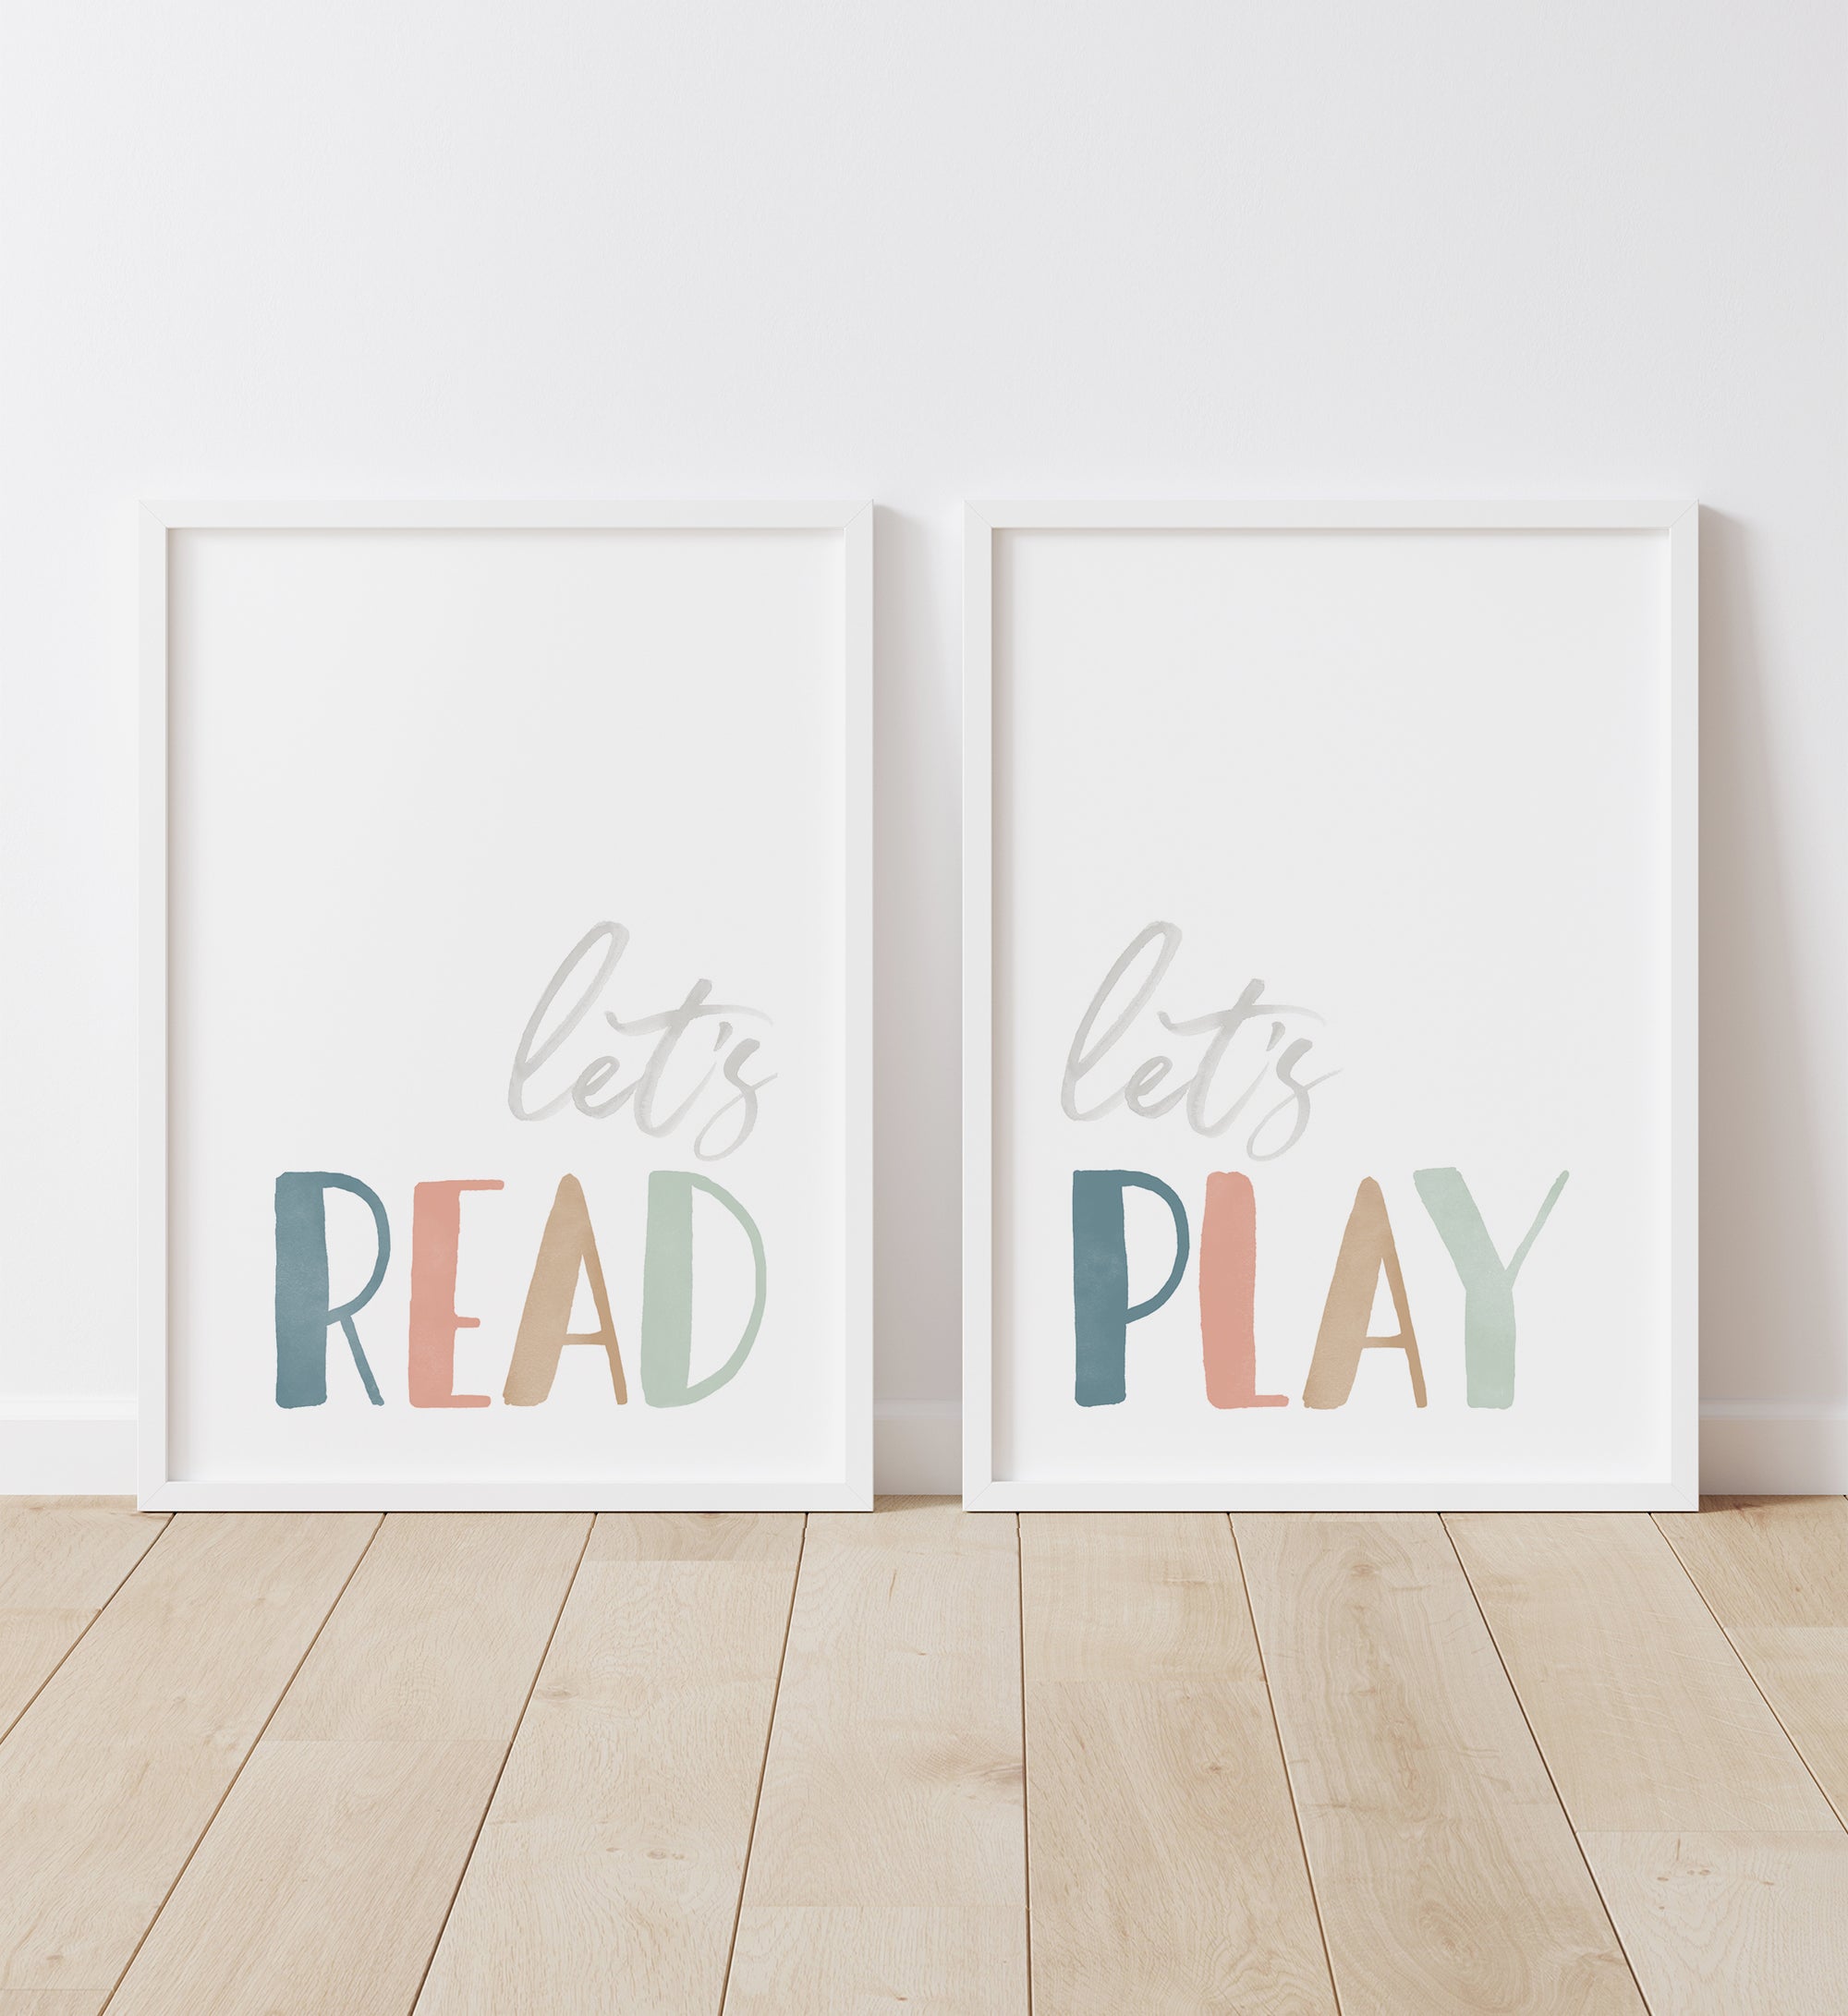 Let's Read, Let's Play Set of 2 Prints - MPCP